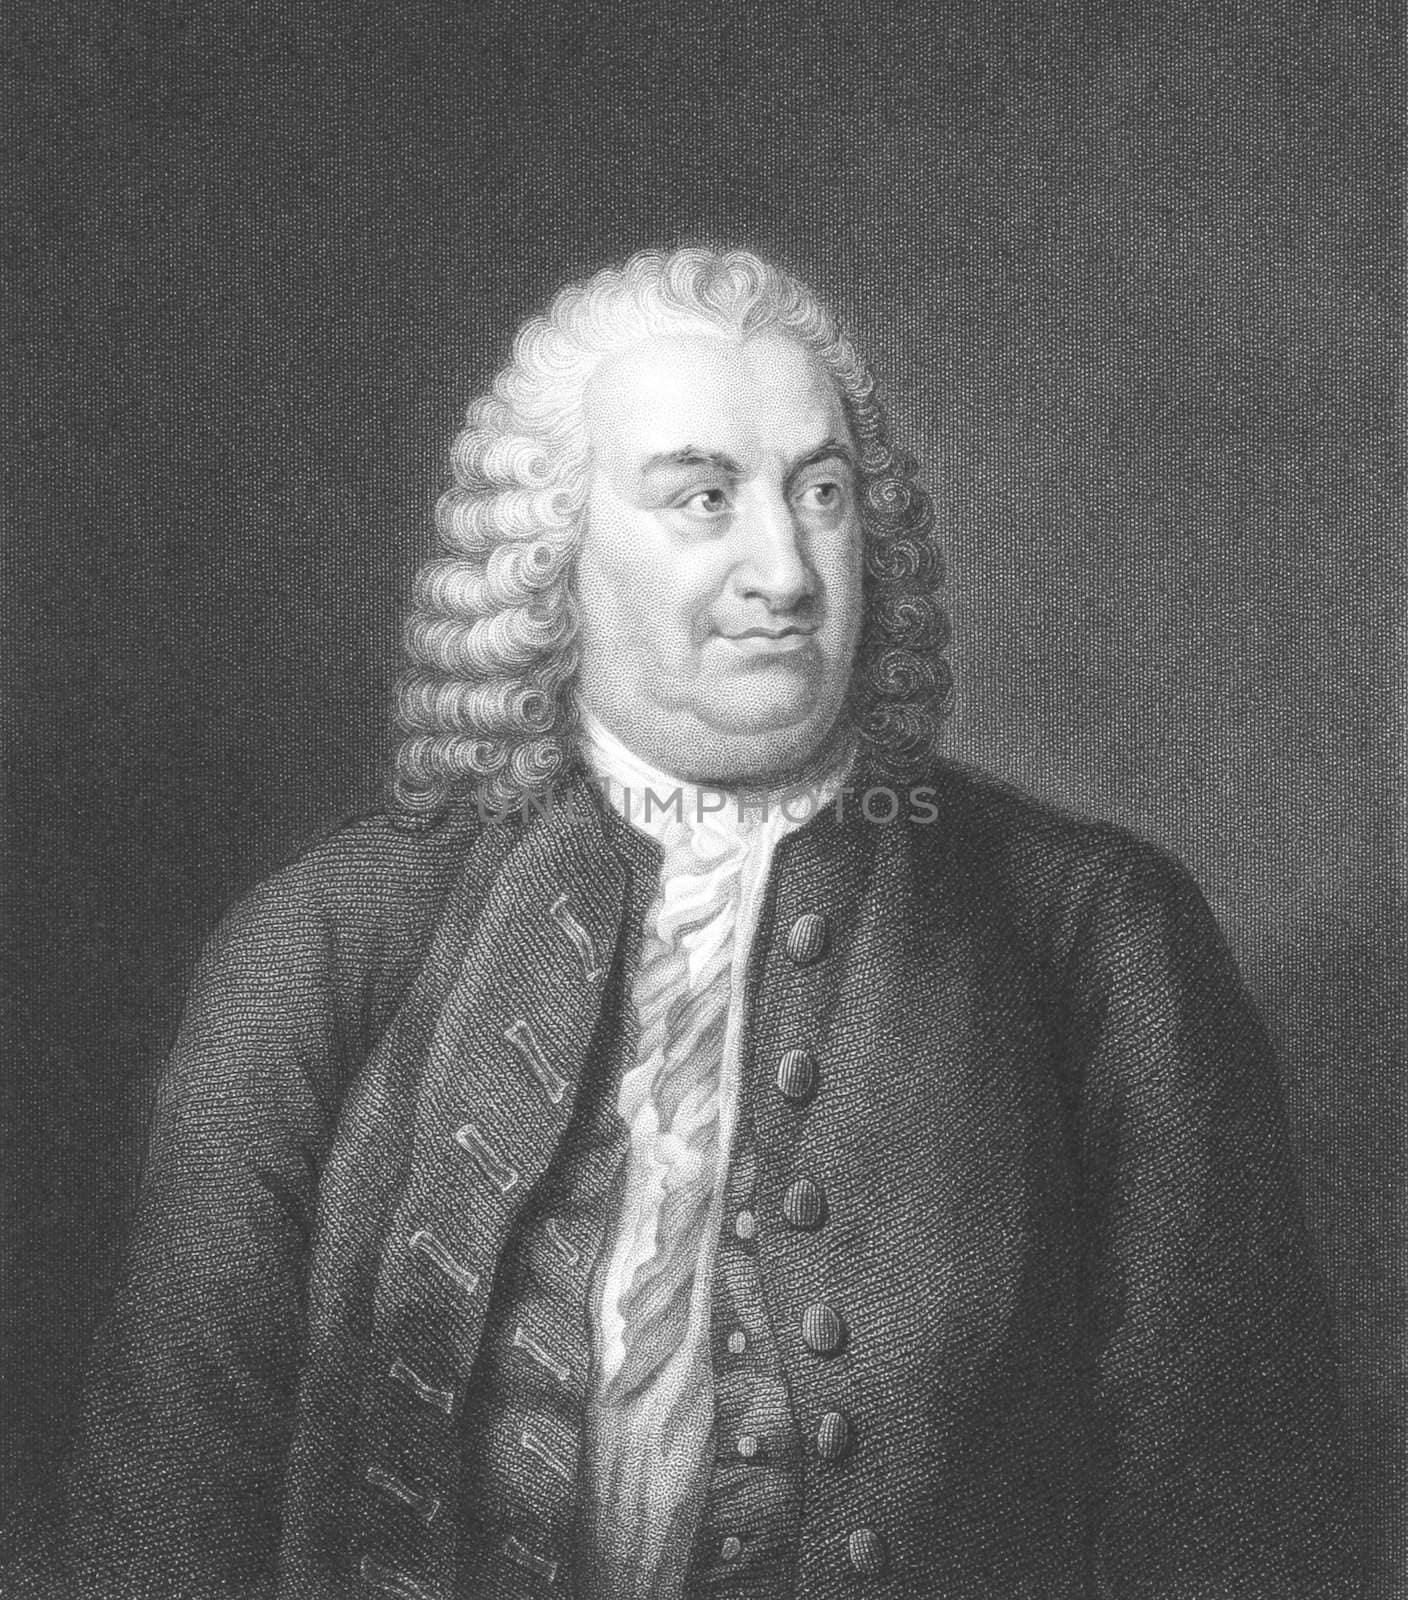 Albrecht von Haller (1708-1777) on engraving from the 1800s. Swiss anatomist, physiologist, naturalist and poet. Engraved by W.Holl and published in London by Fisher, Son & Co in 1838.